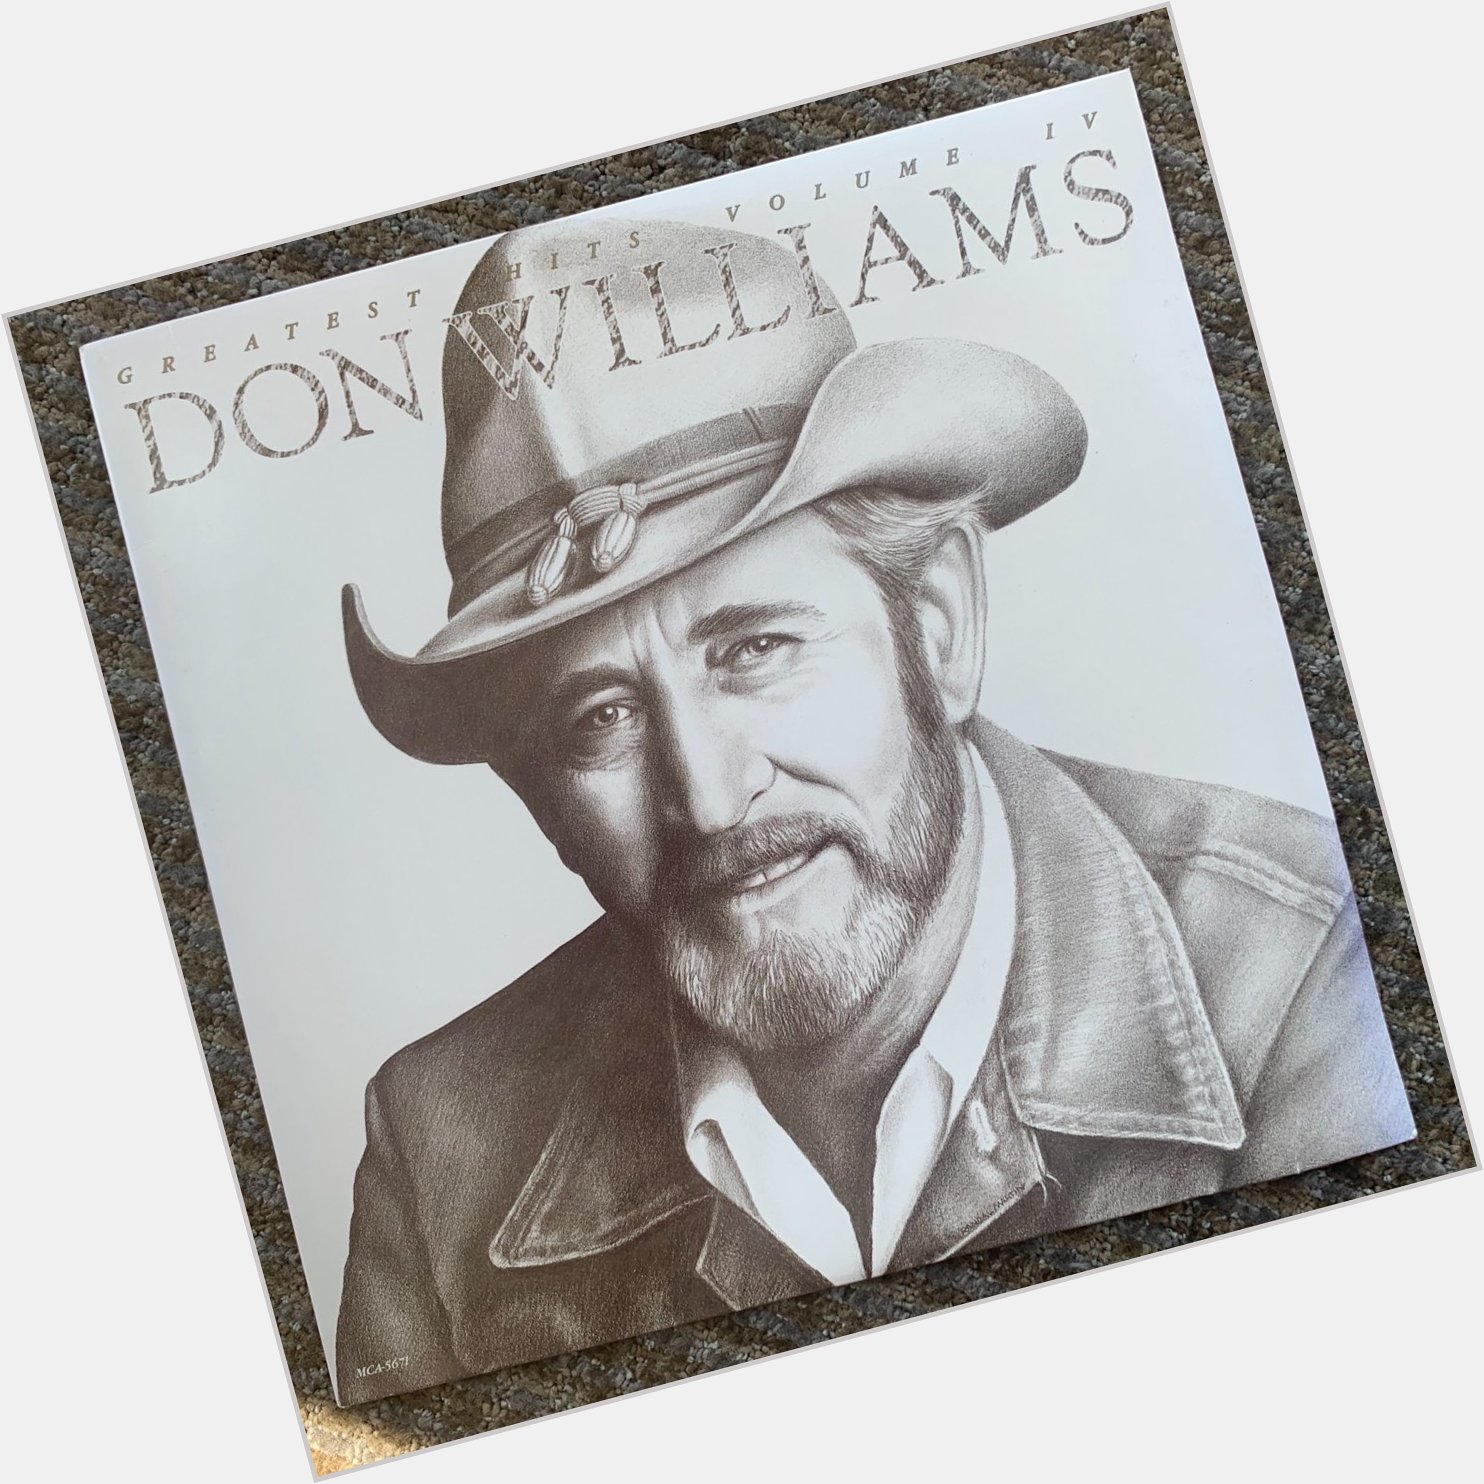 Let\s spin some vinyl today in honor of the late Don Williams\ birthday. The Gentle Giant!

 